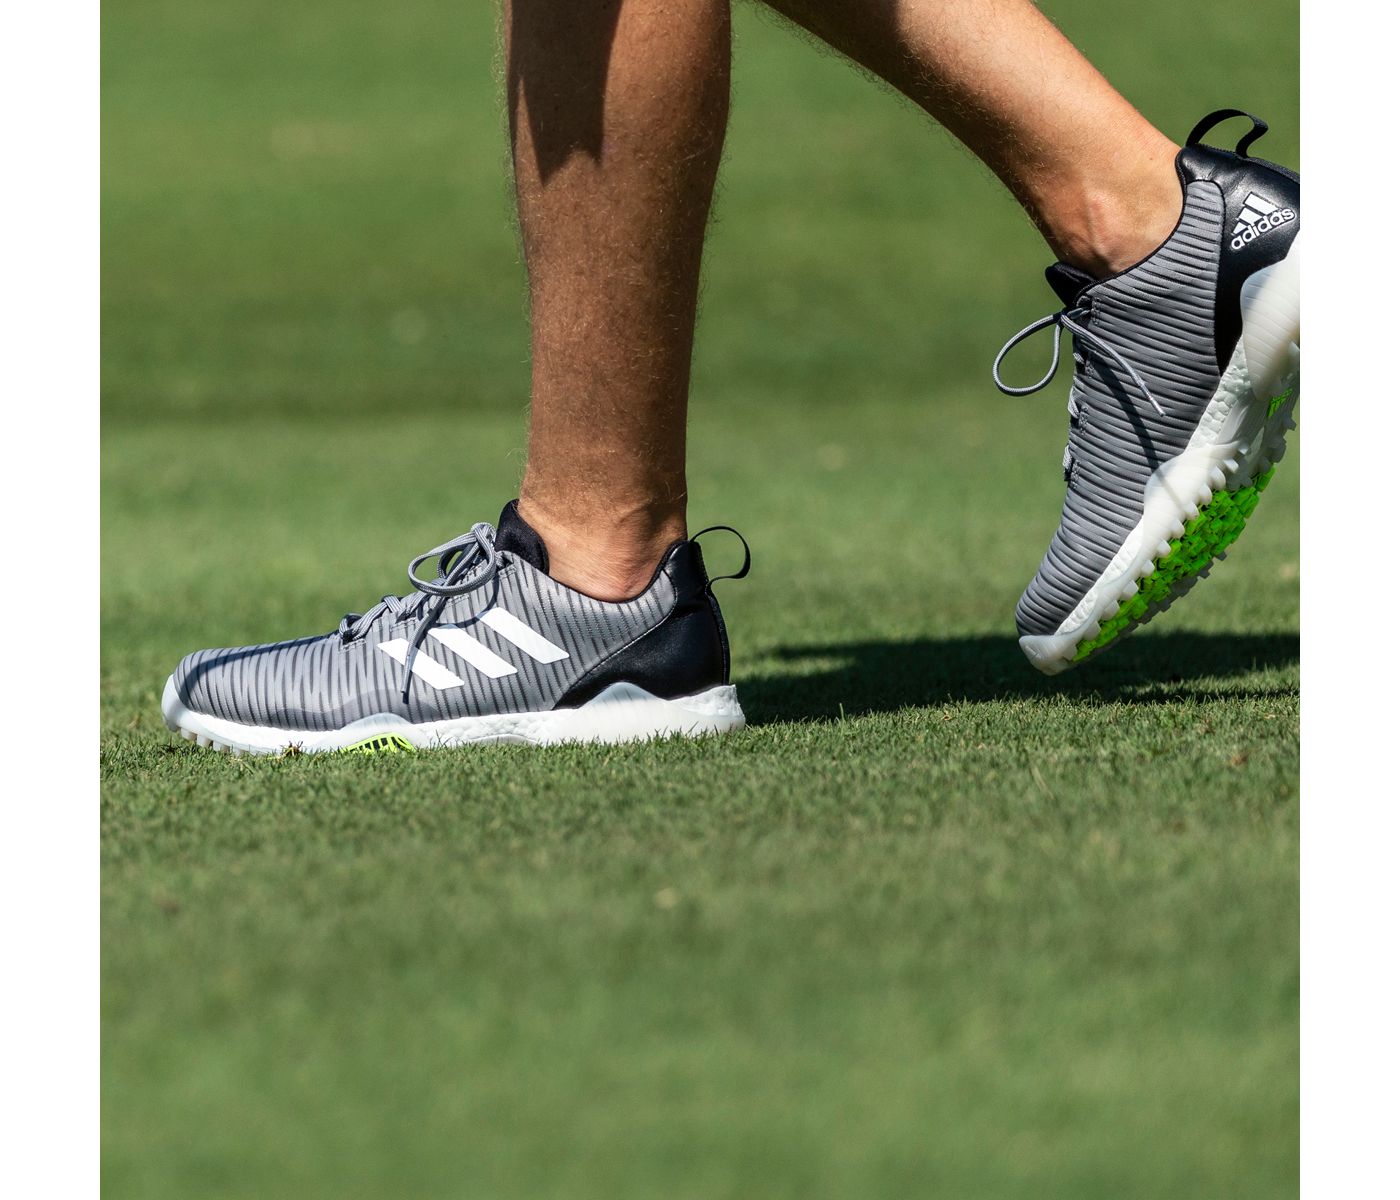 Adidas CodeChaos Golf Shoe - [Course Tested and Expert Review]